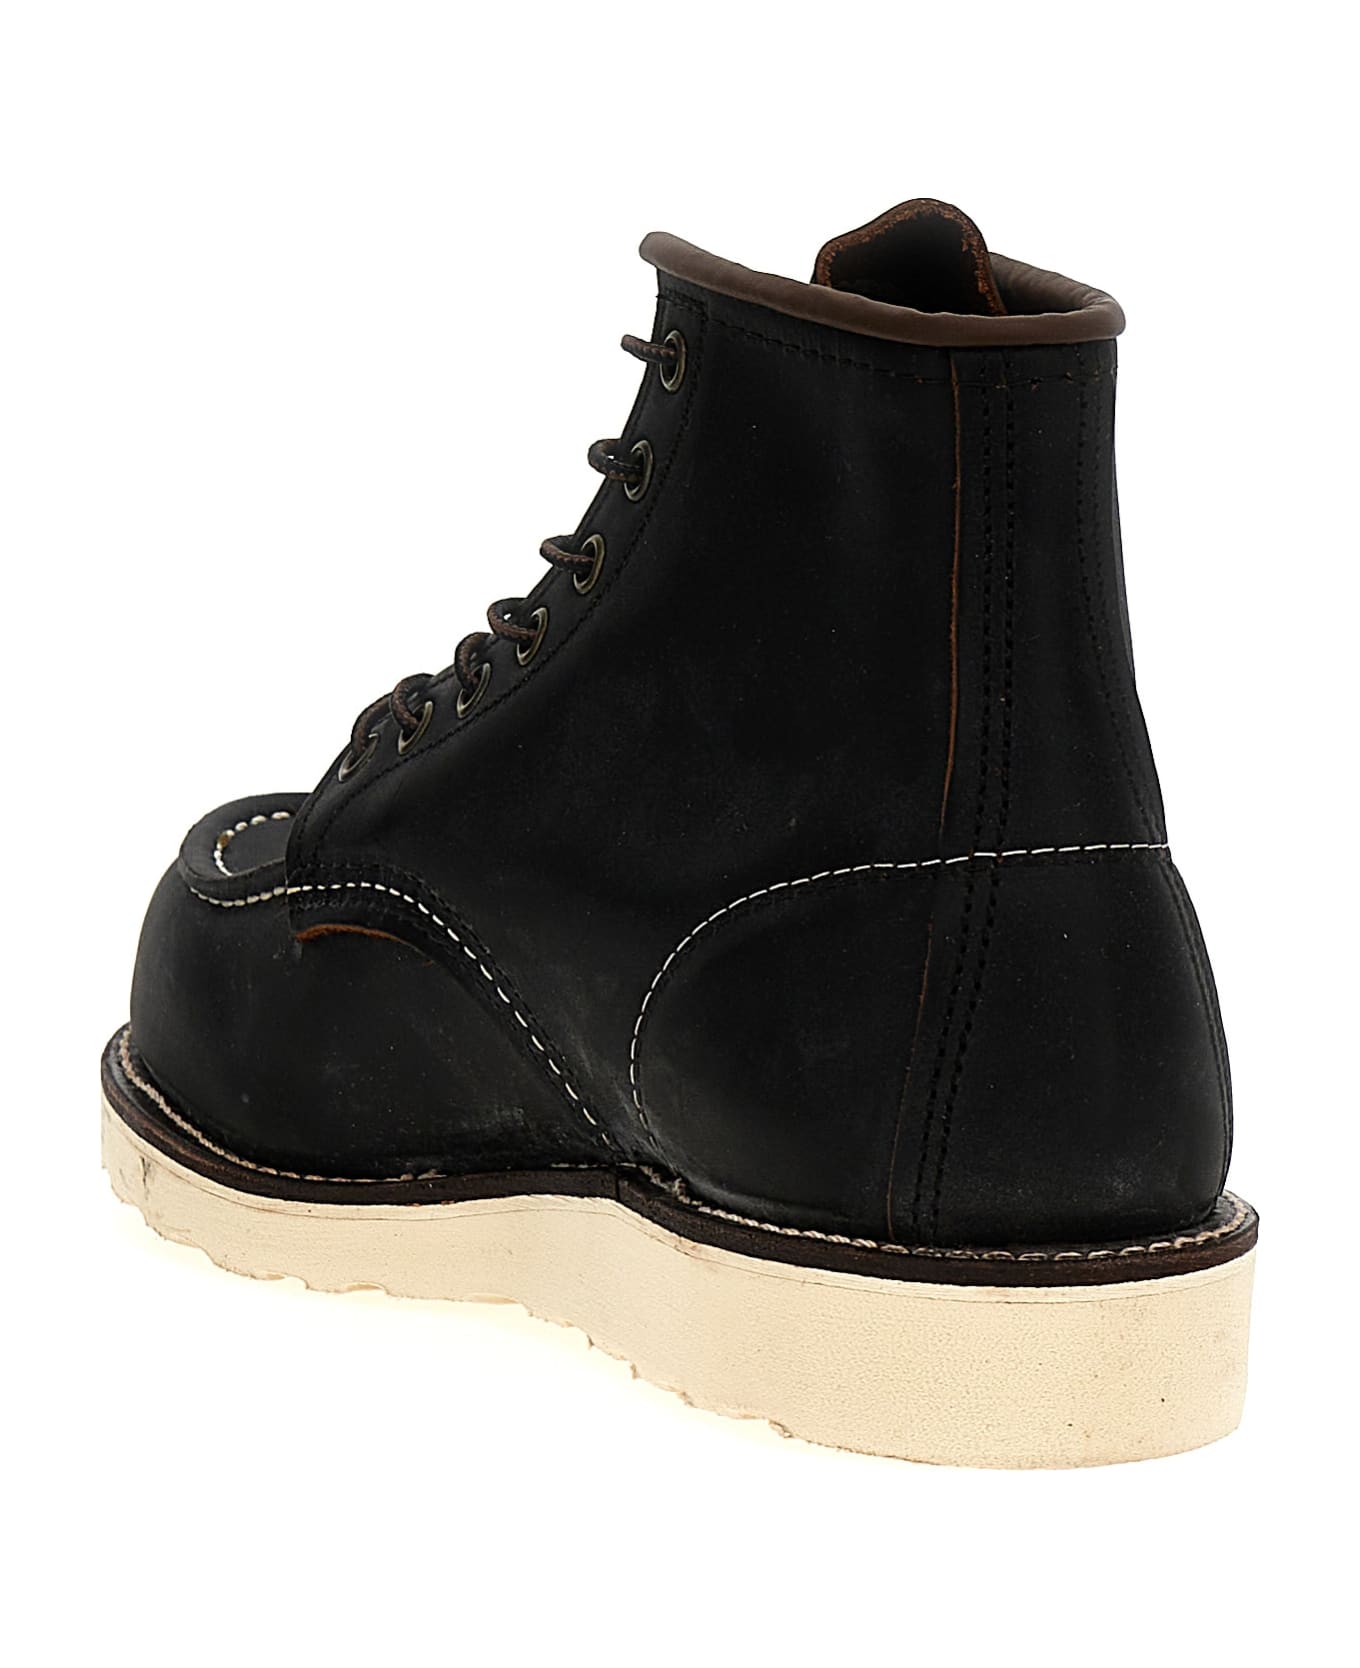 Red Wing 'classic Moc' Ankle Boots - Black   ブーツ